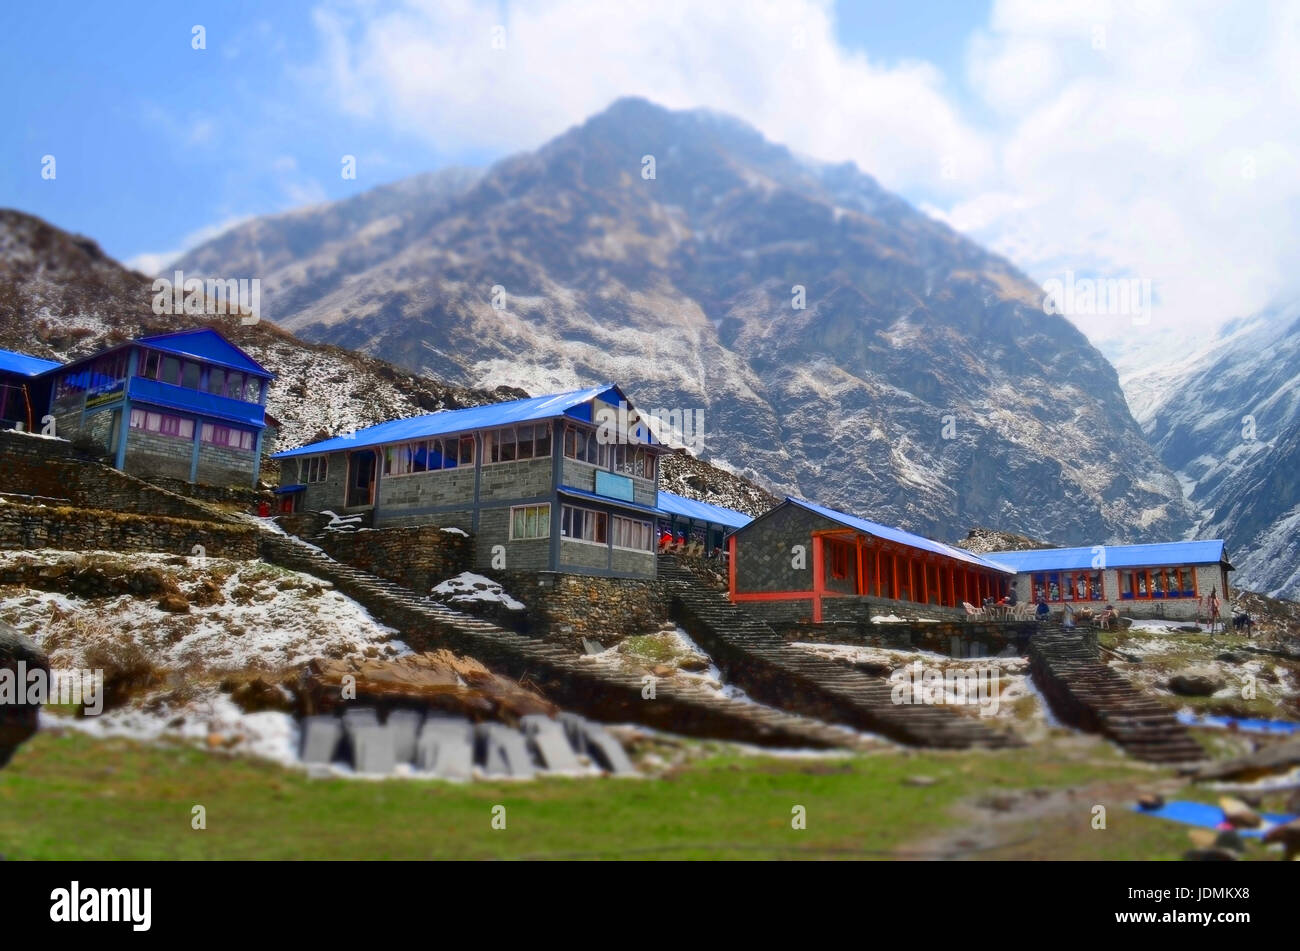 Lodge for traveler on the mountain, in Machpuchare Base Camp. Nepal. Stock Photo